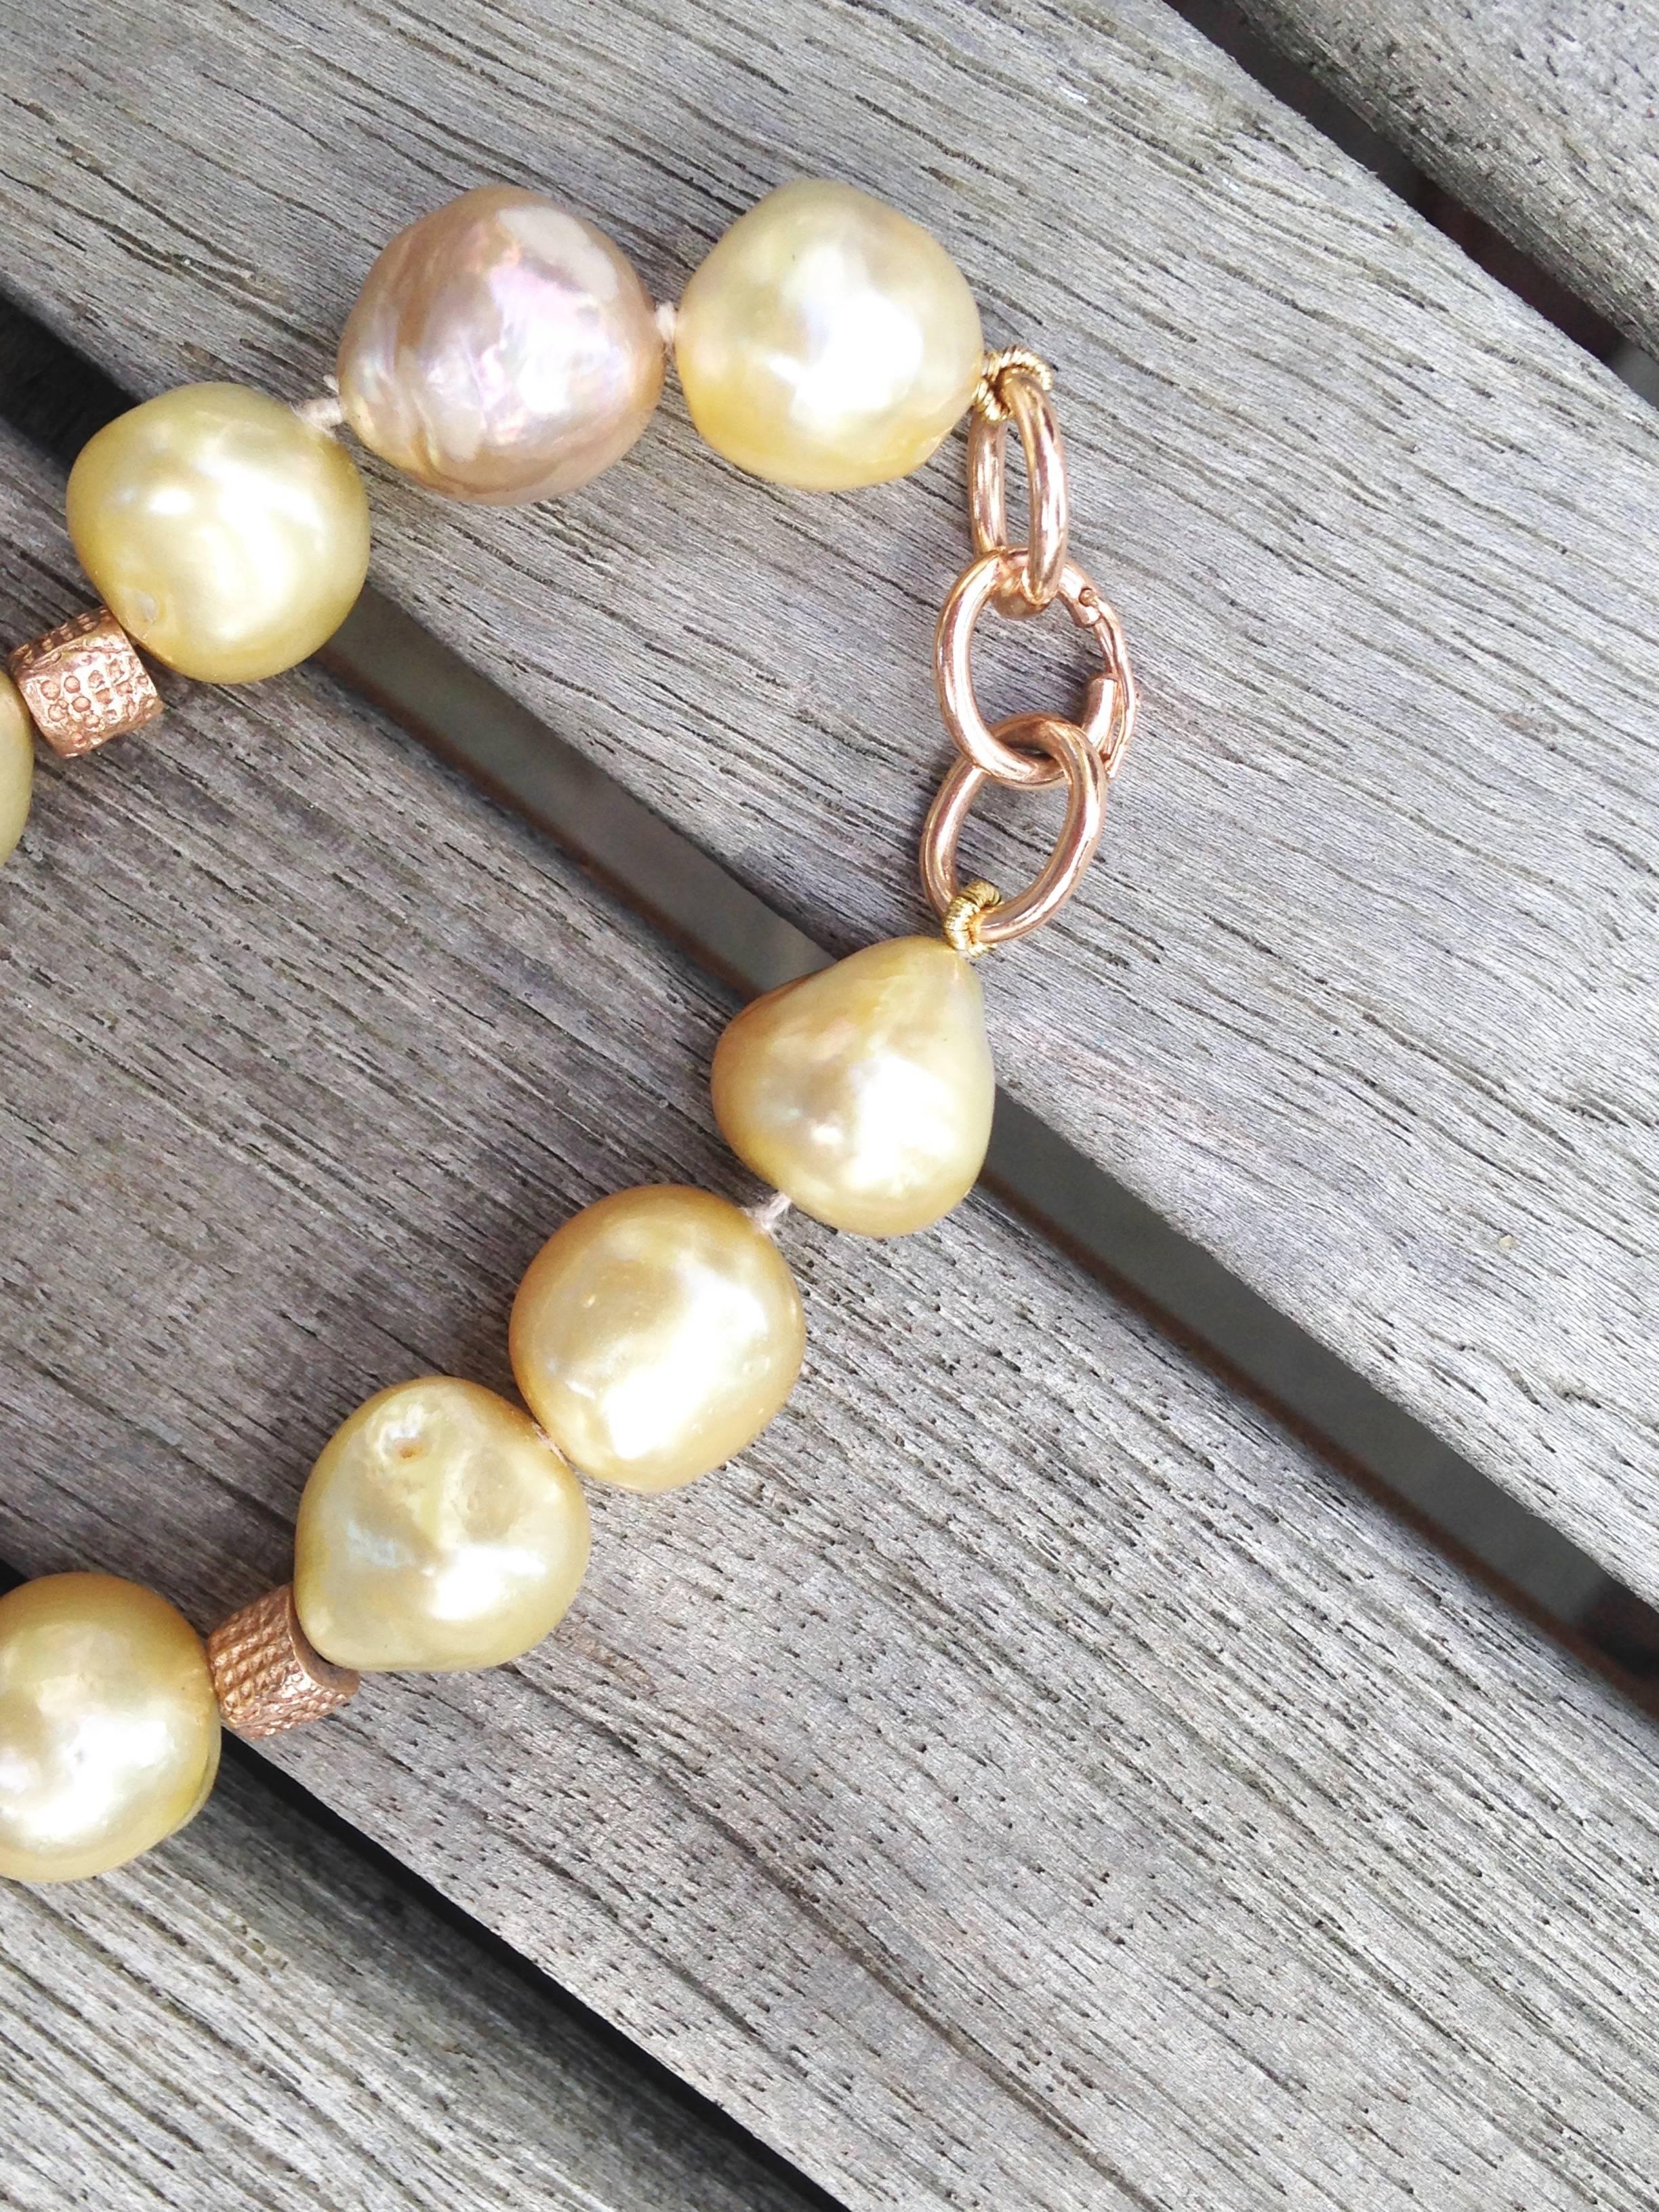 Artist Natural Golden South Sea Baroque and Freshwater Pink Mabé Pearl Necklace